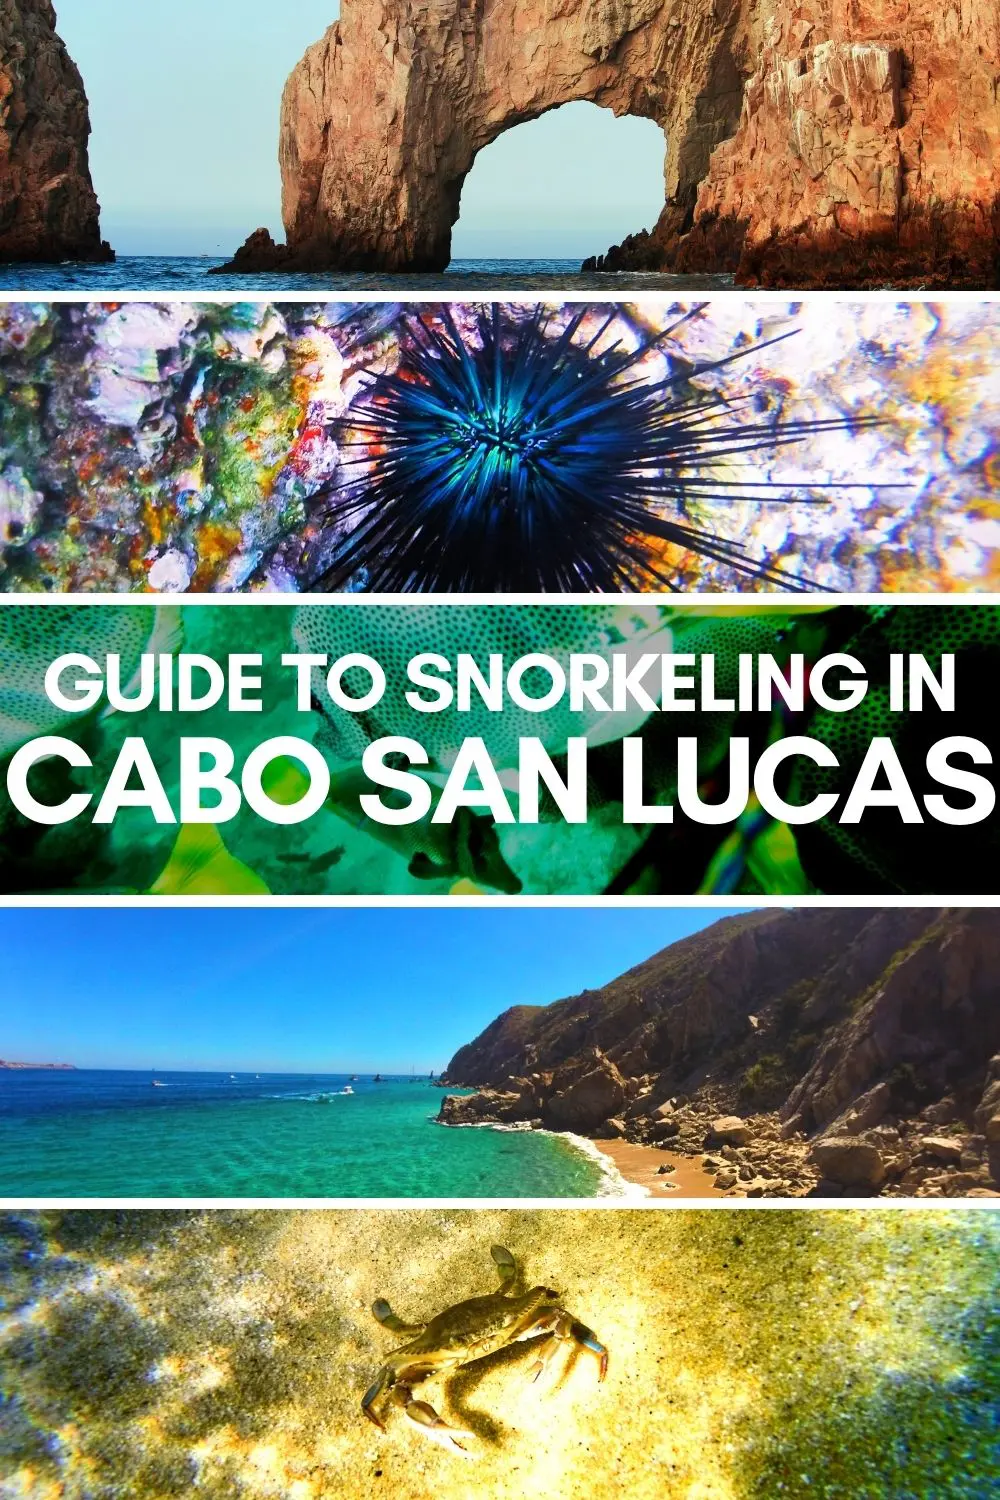 Guide to snorkeling in Cabo San Lucas, all the way up to Cabo Pulmo National Park. Snorkeling maps and tour recommendations, on your own or with kids. Best of Baja beaches and wildlife.